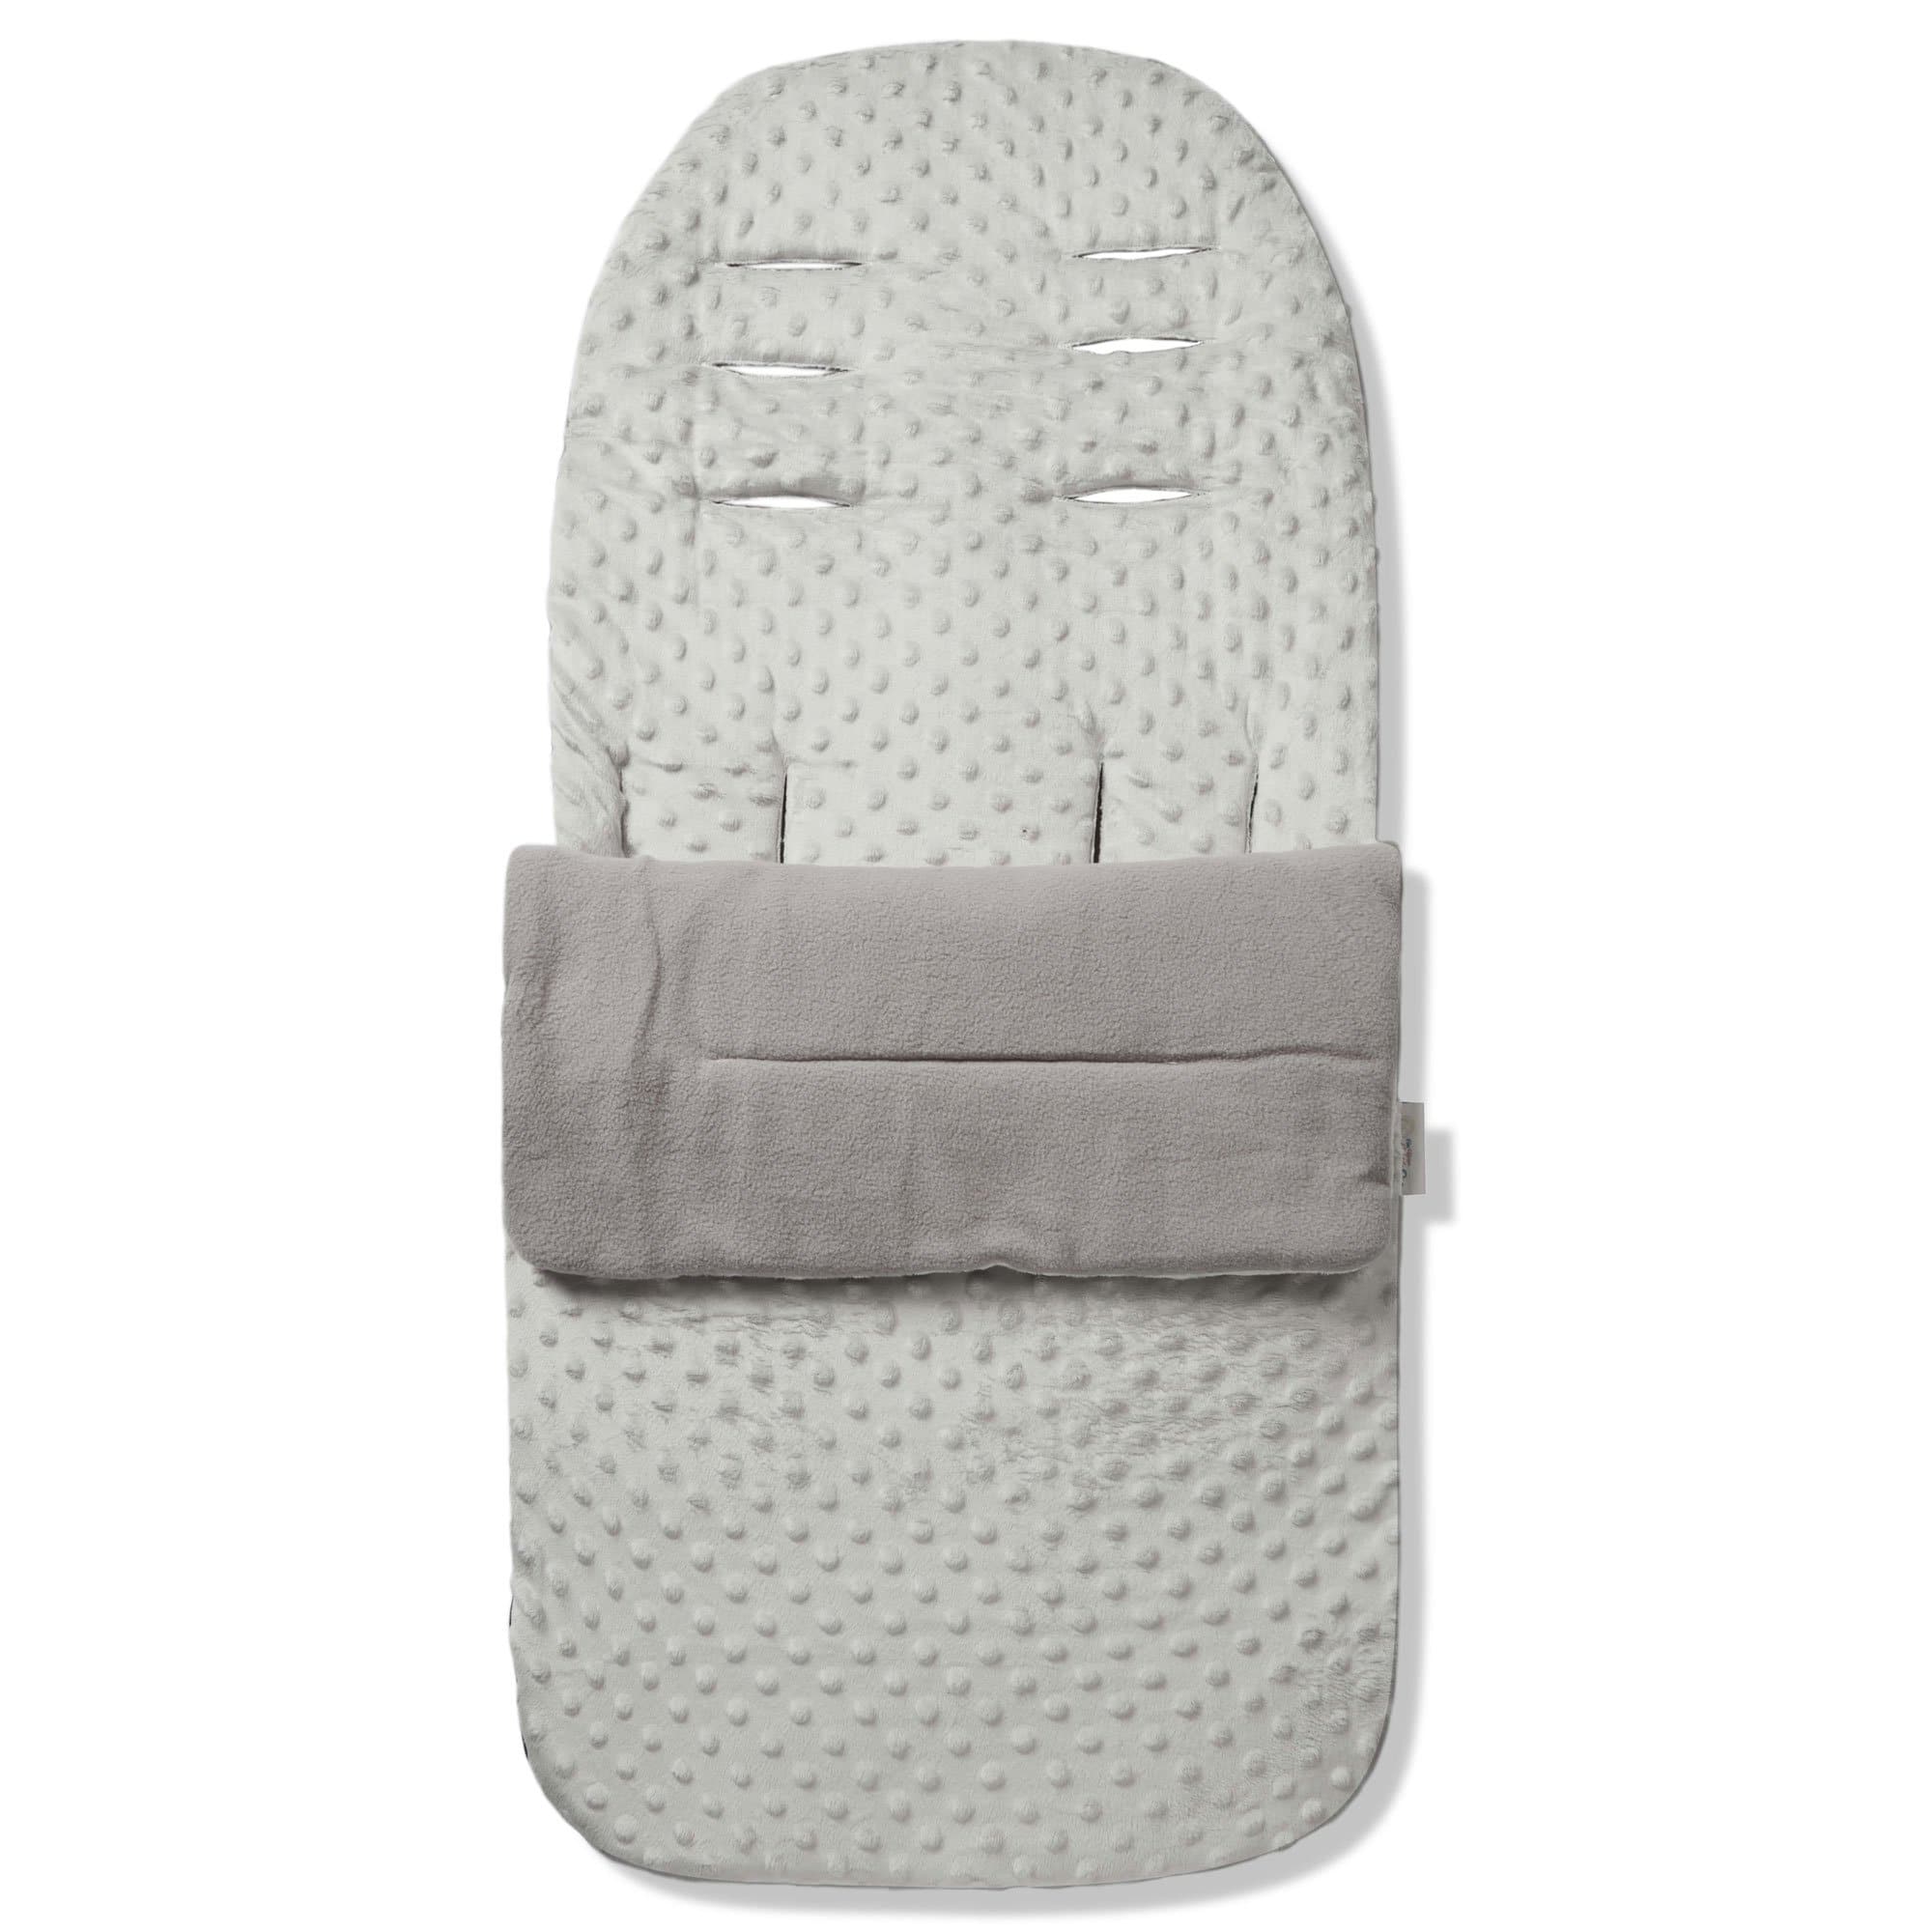 Dimple Footmuff / Cosy Toes Compatible with Venicci - Grey / Fits All Models | For Your Little One